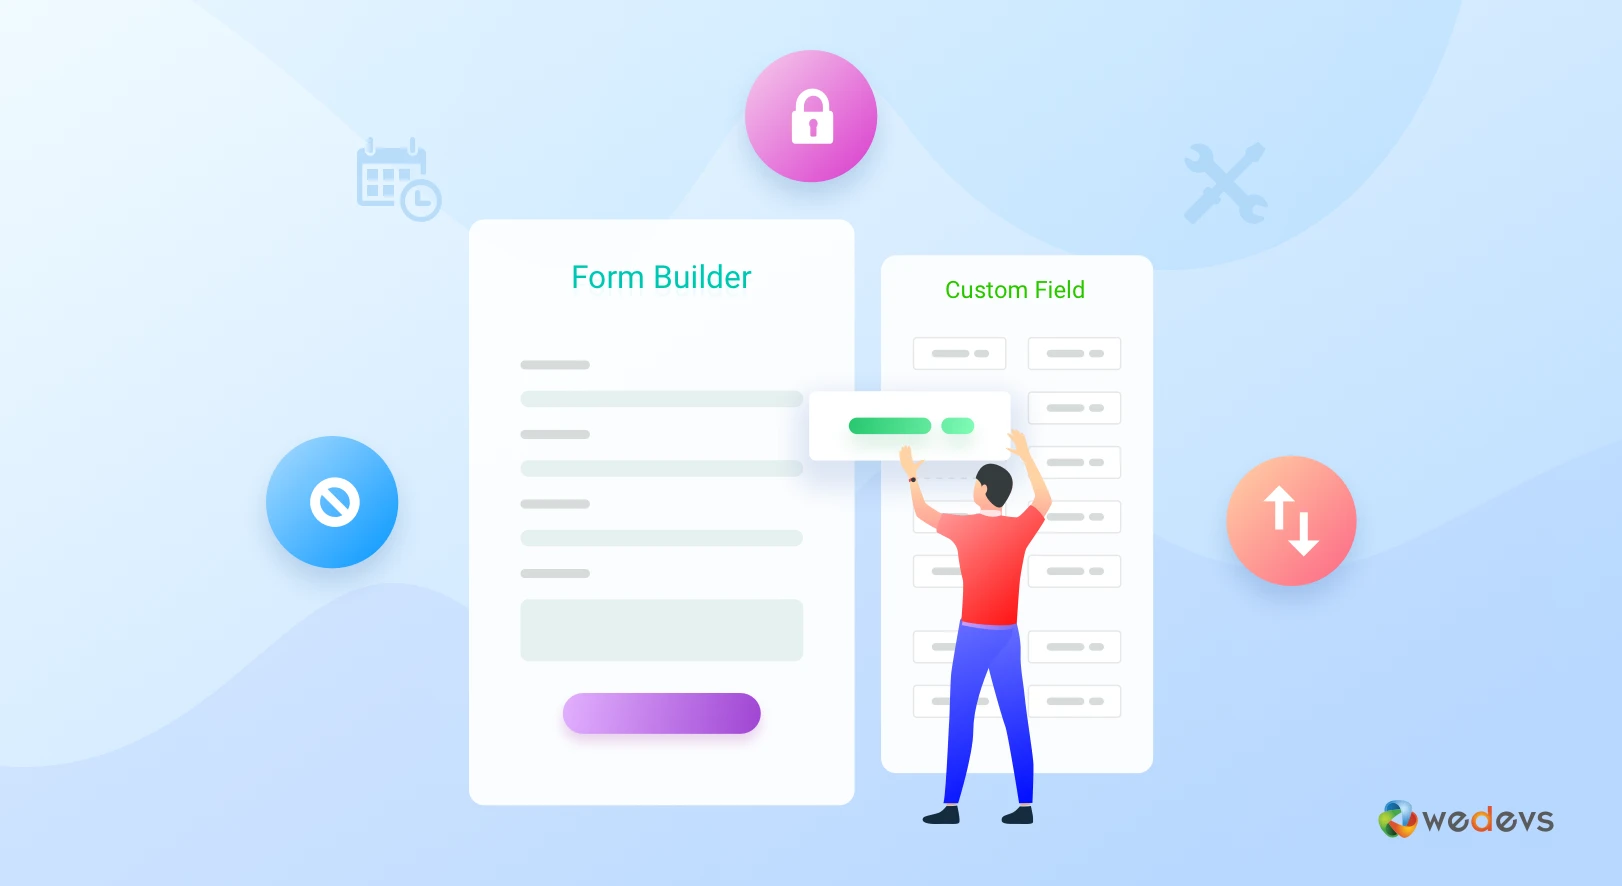 Most Useful Way A WordPress Contact Form Builder Should Perform in 2023